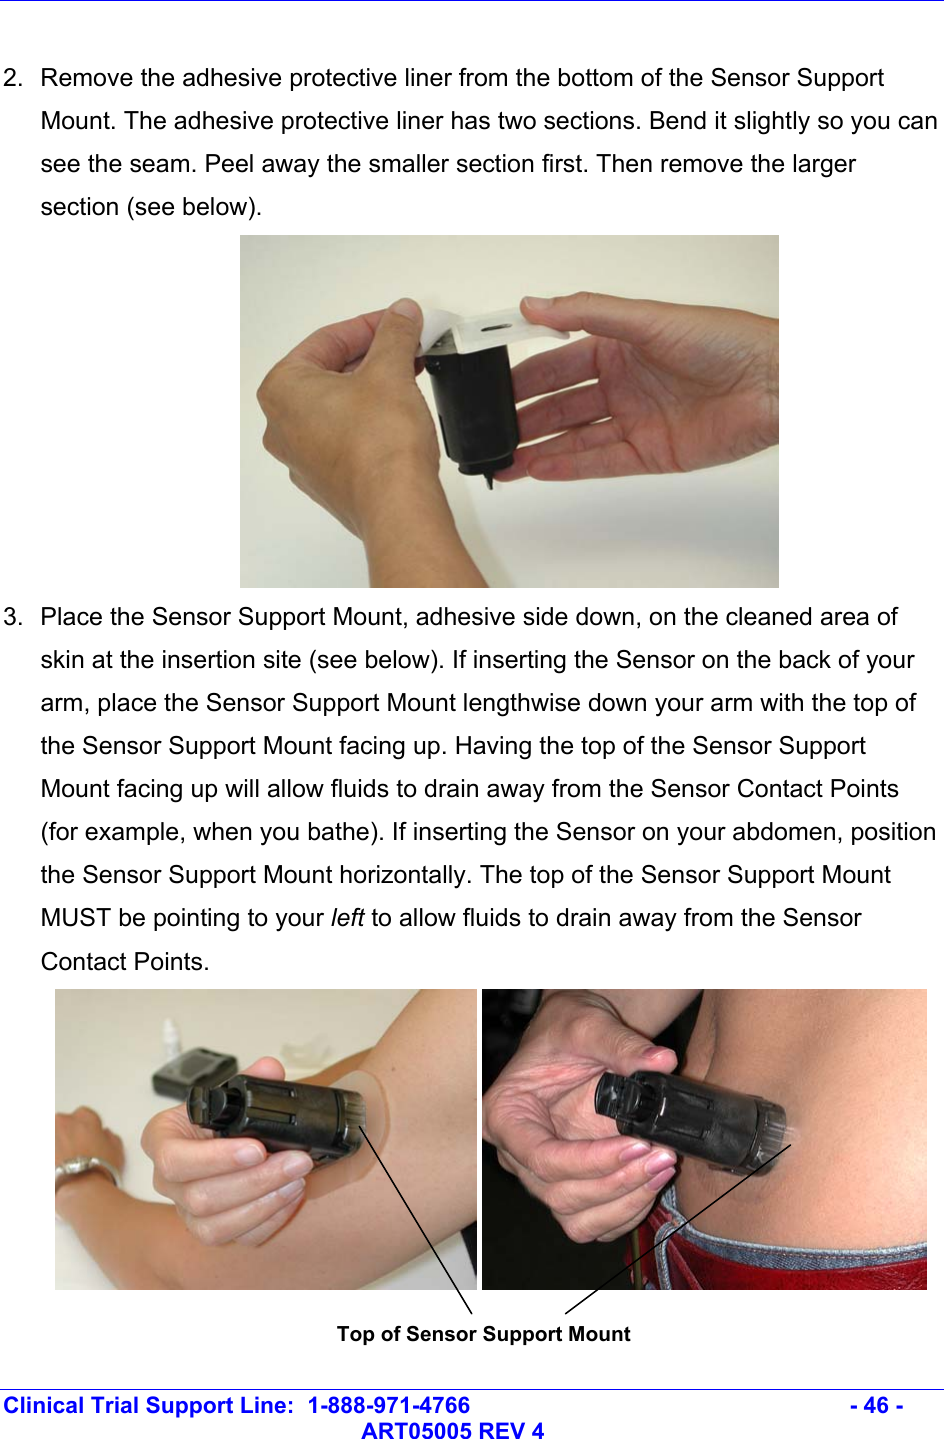   Clinical Trial Support Line:  1-888-971-4766   - 46 -   ART05005 REV 4  2.  Remove the adhesive protective liner from the bottom of the Sensor Support Mount. The adhesive protective liner has two sections. Bend it slightly so you can see the seam. Peel away the smaller section first. Then remove the larger section (see below).  3.  Place the Sensor Support Mount, adhesive side down, on the cleaned area of skin at the insertion site (see below). If inserting the Sensor on the back of your arm, place the Sensor Support Mount lengthwise down your arm with the top of the Sensor Support Mount facing up. Having the top of the Sensor Support Mount facing up will allow fluids to drain away from the Sensor Contact Points (for example, when you bathe). If inserting the Sensor on your abdomen, position the Sensor Support Mount horizontally. The top of the Sensor Support Mount MUST be pointing to your left to allow fluids to drain away from the Sensor Contact Points.     Top of Sensor Support Mount 